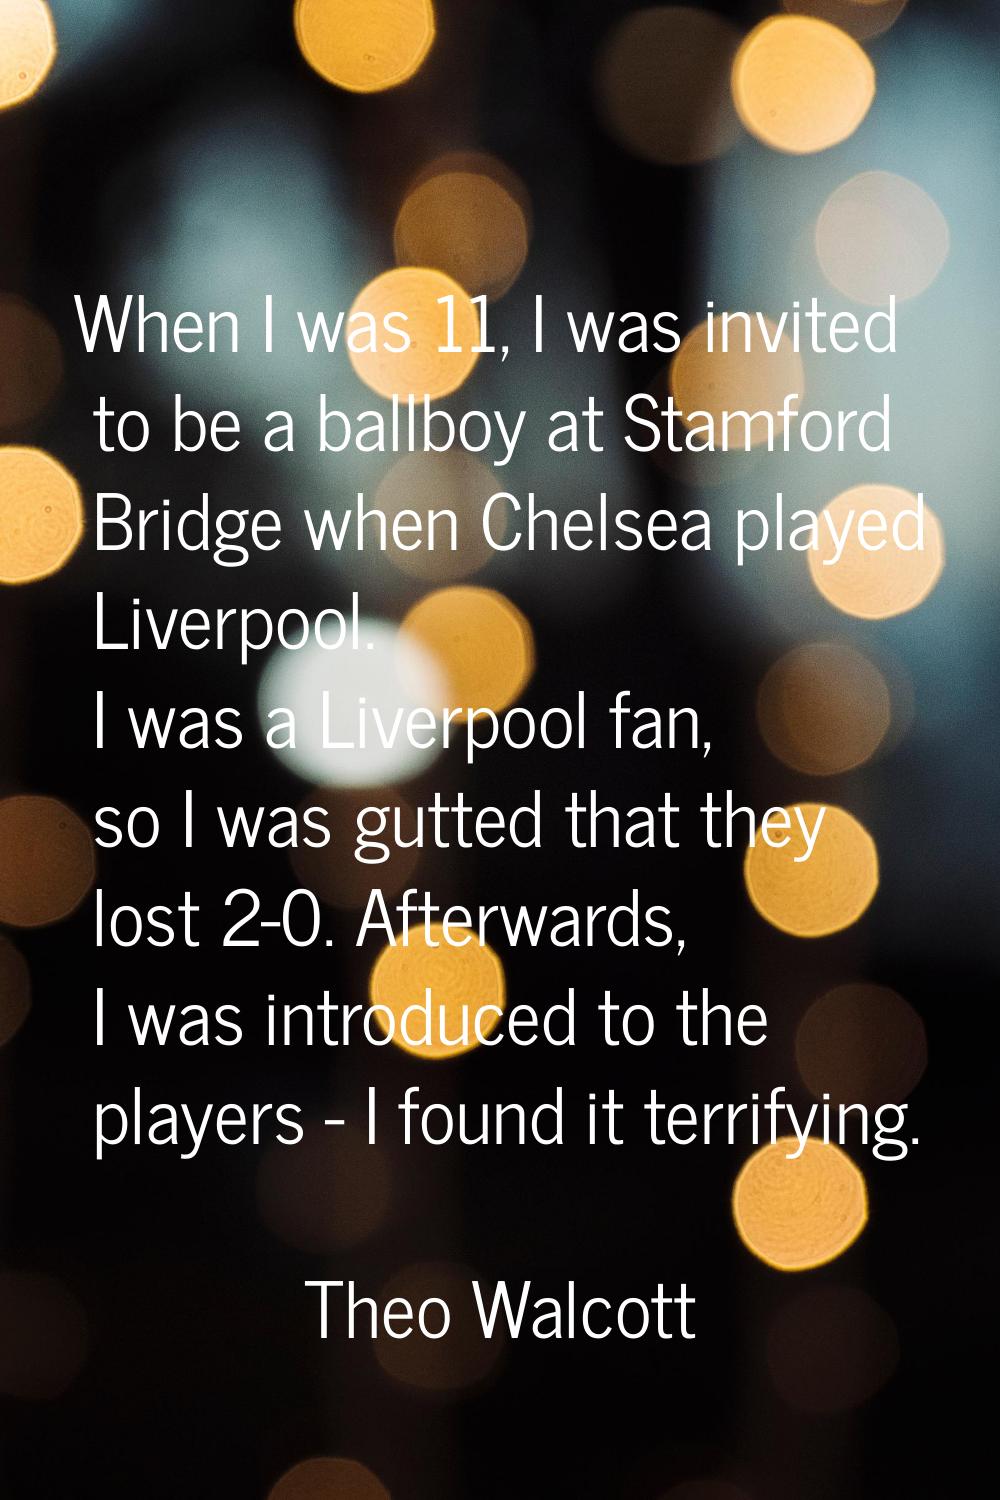 When I was 11, I was invited to be a ballboy at Stamford Bridge when Chelsea played Liverpool. I wa